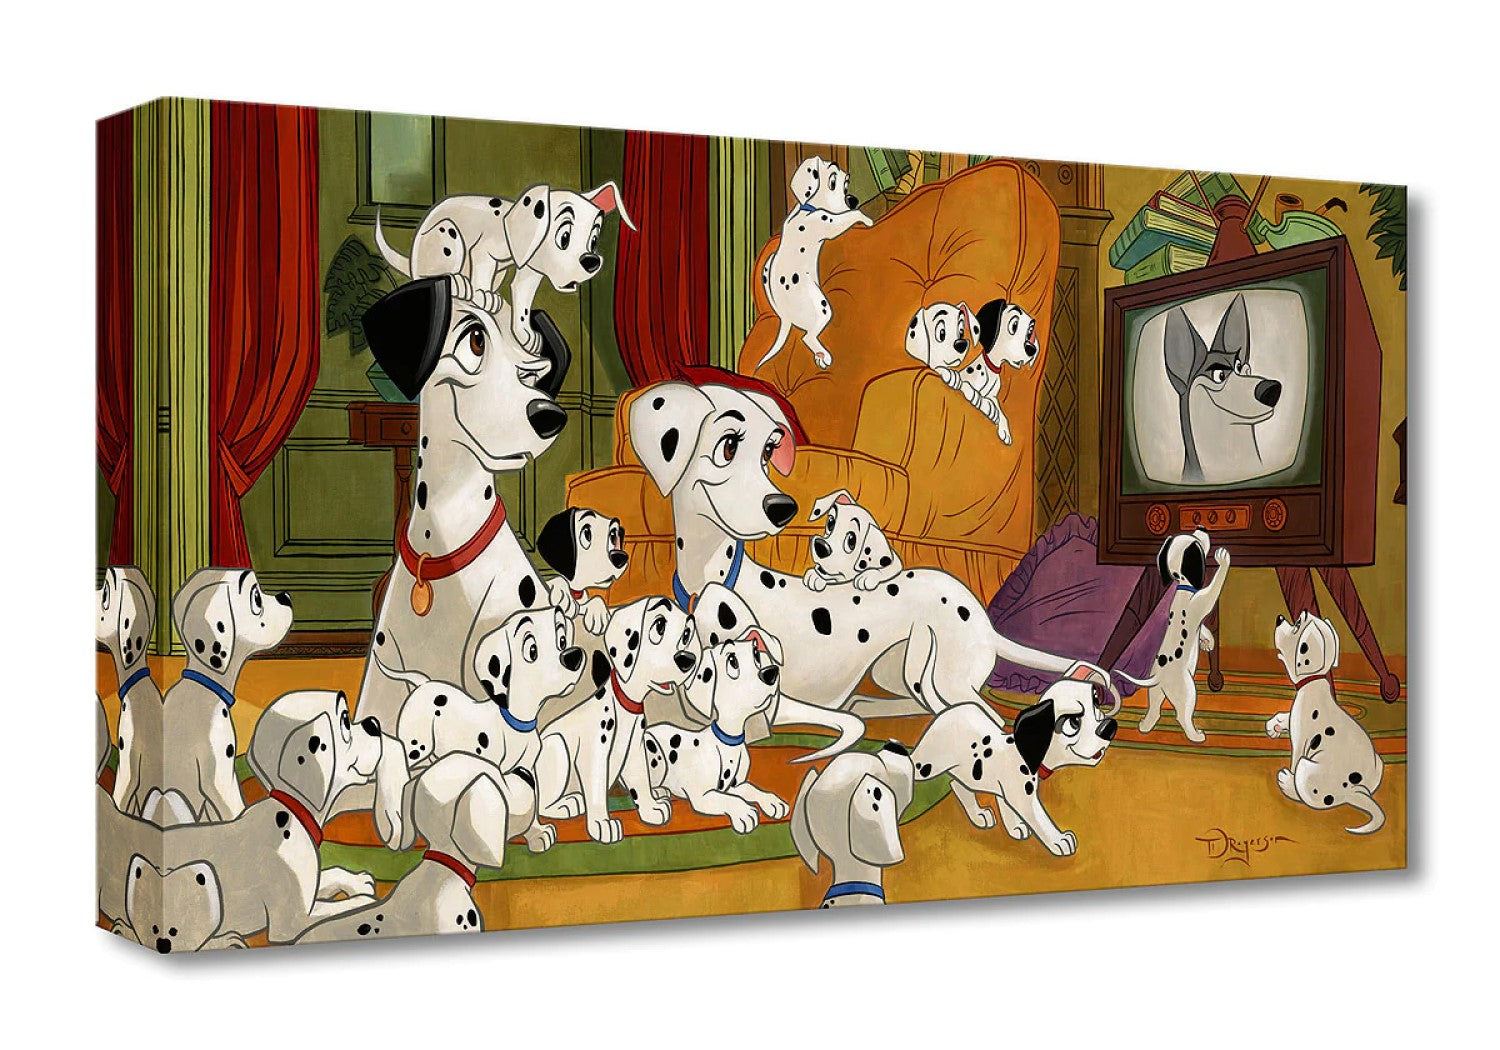 Movie Night by Tim Rogerson inspired by 101 Dalmatians